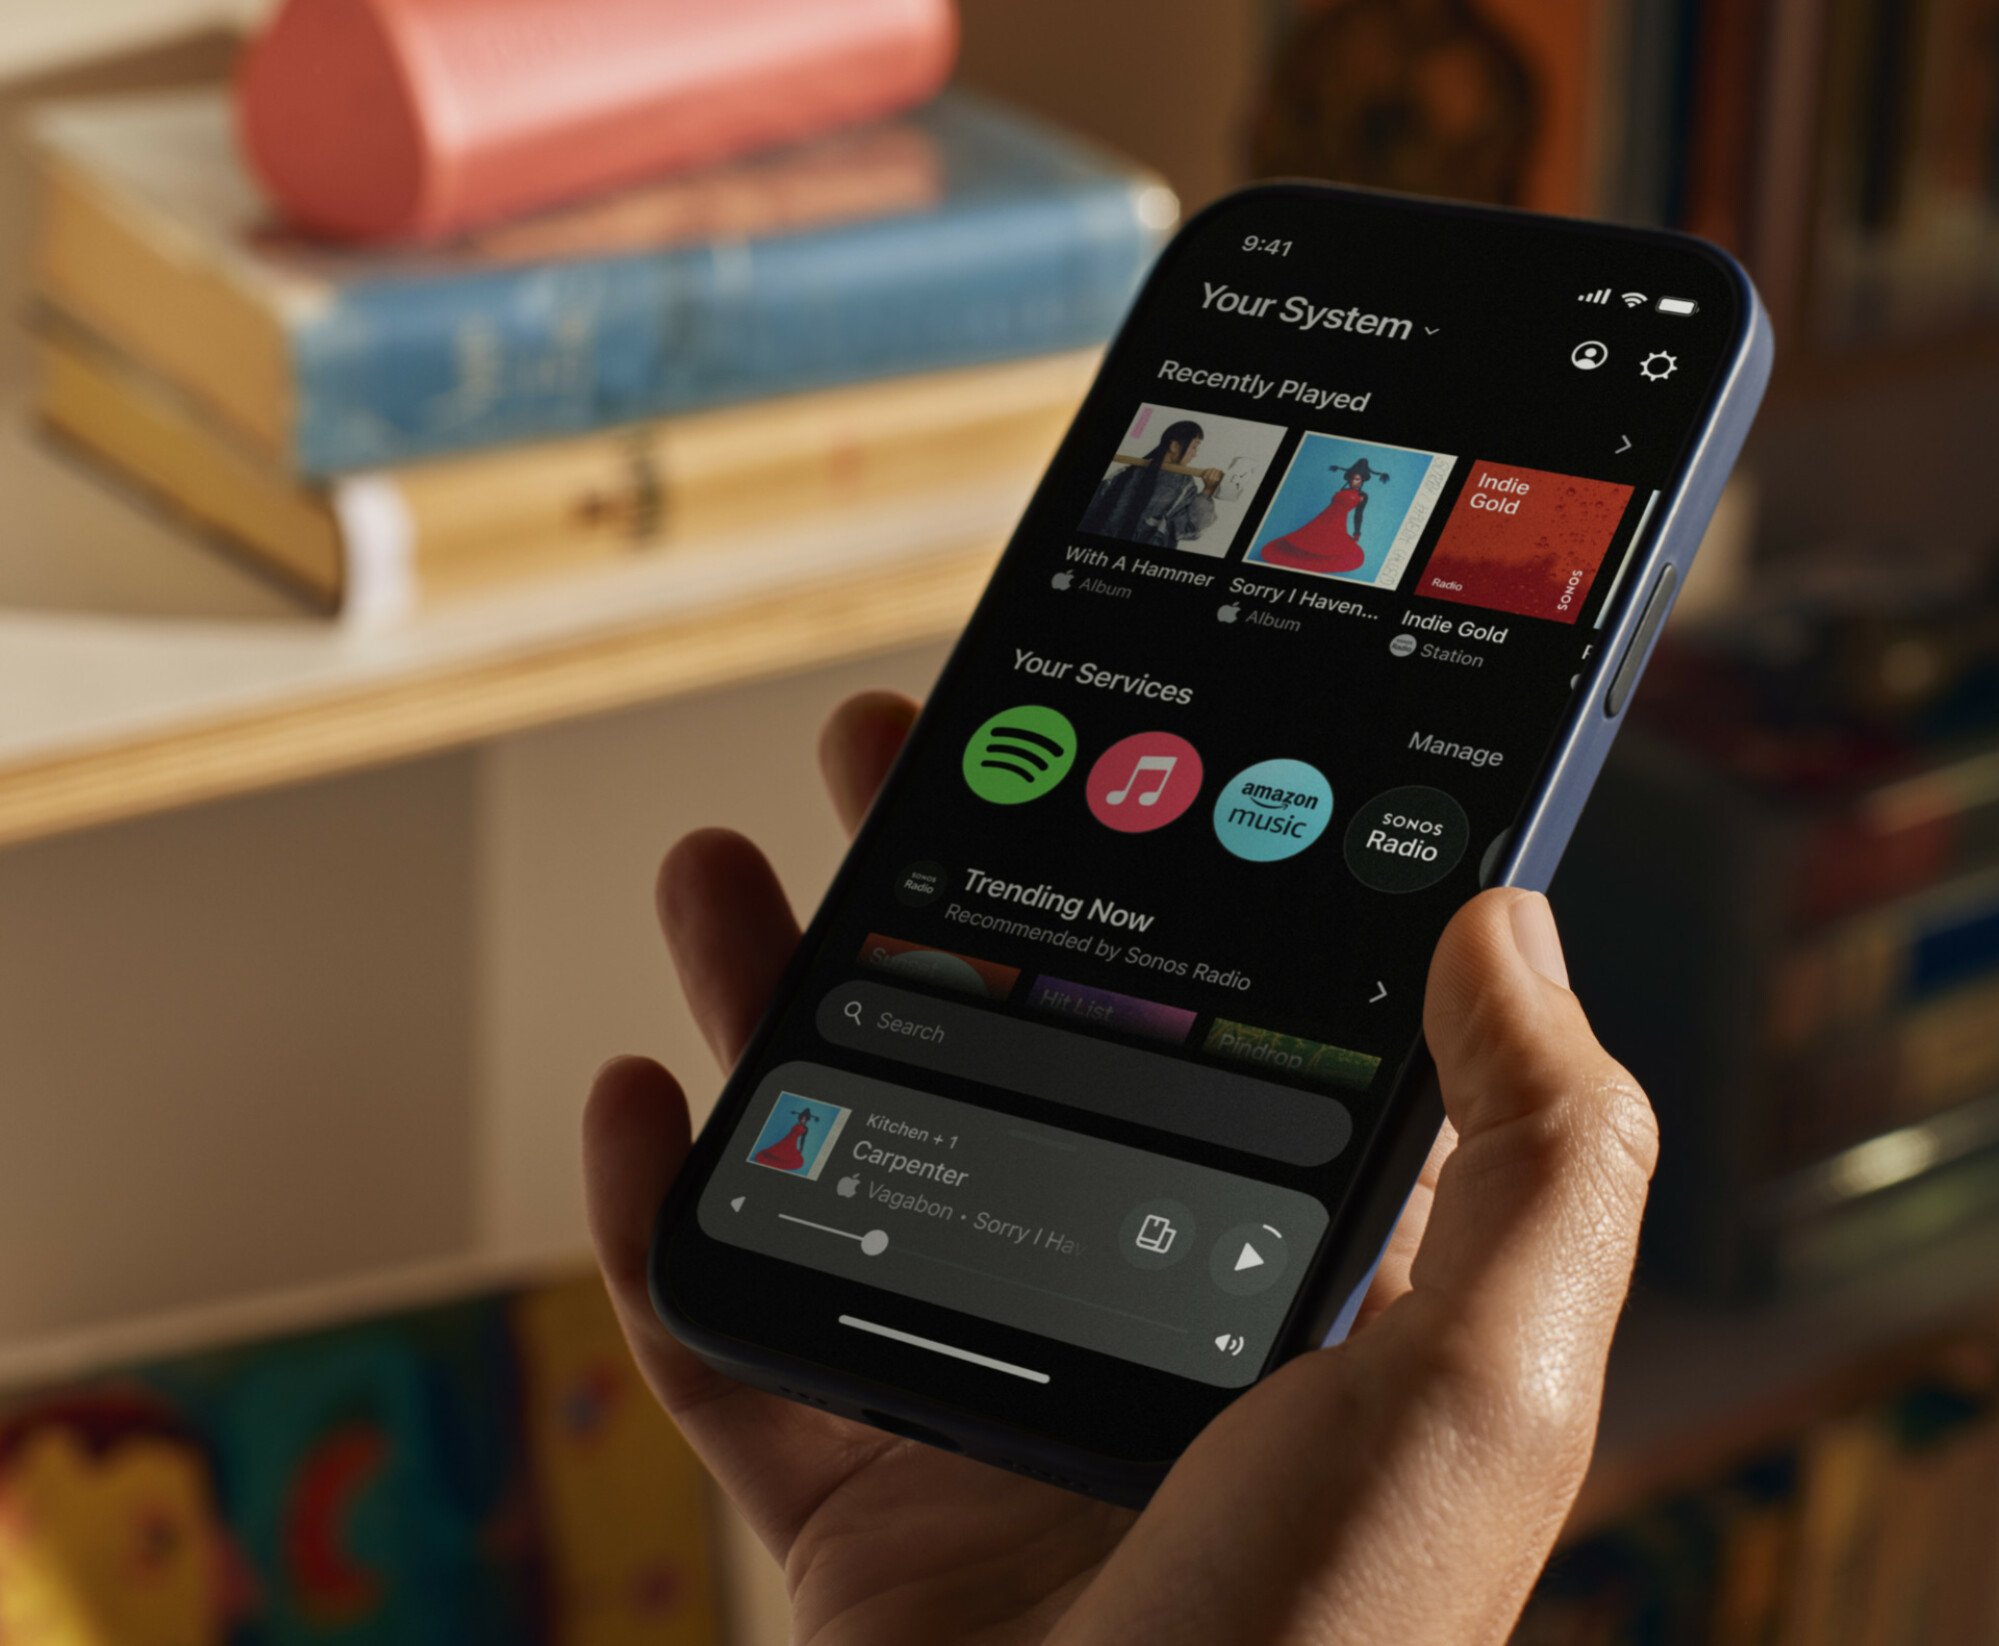 The Sonos mobile app shown on a smartphone.